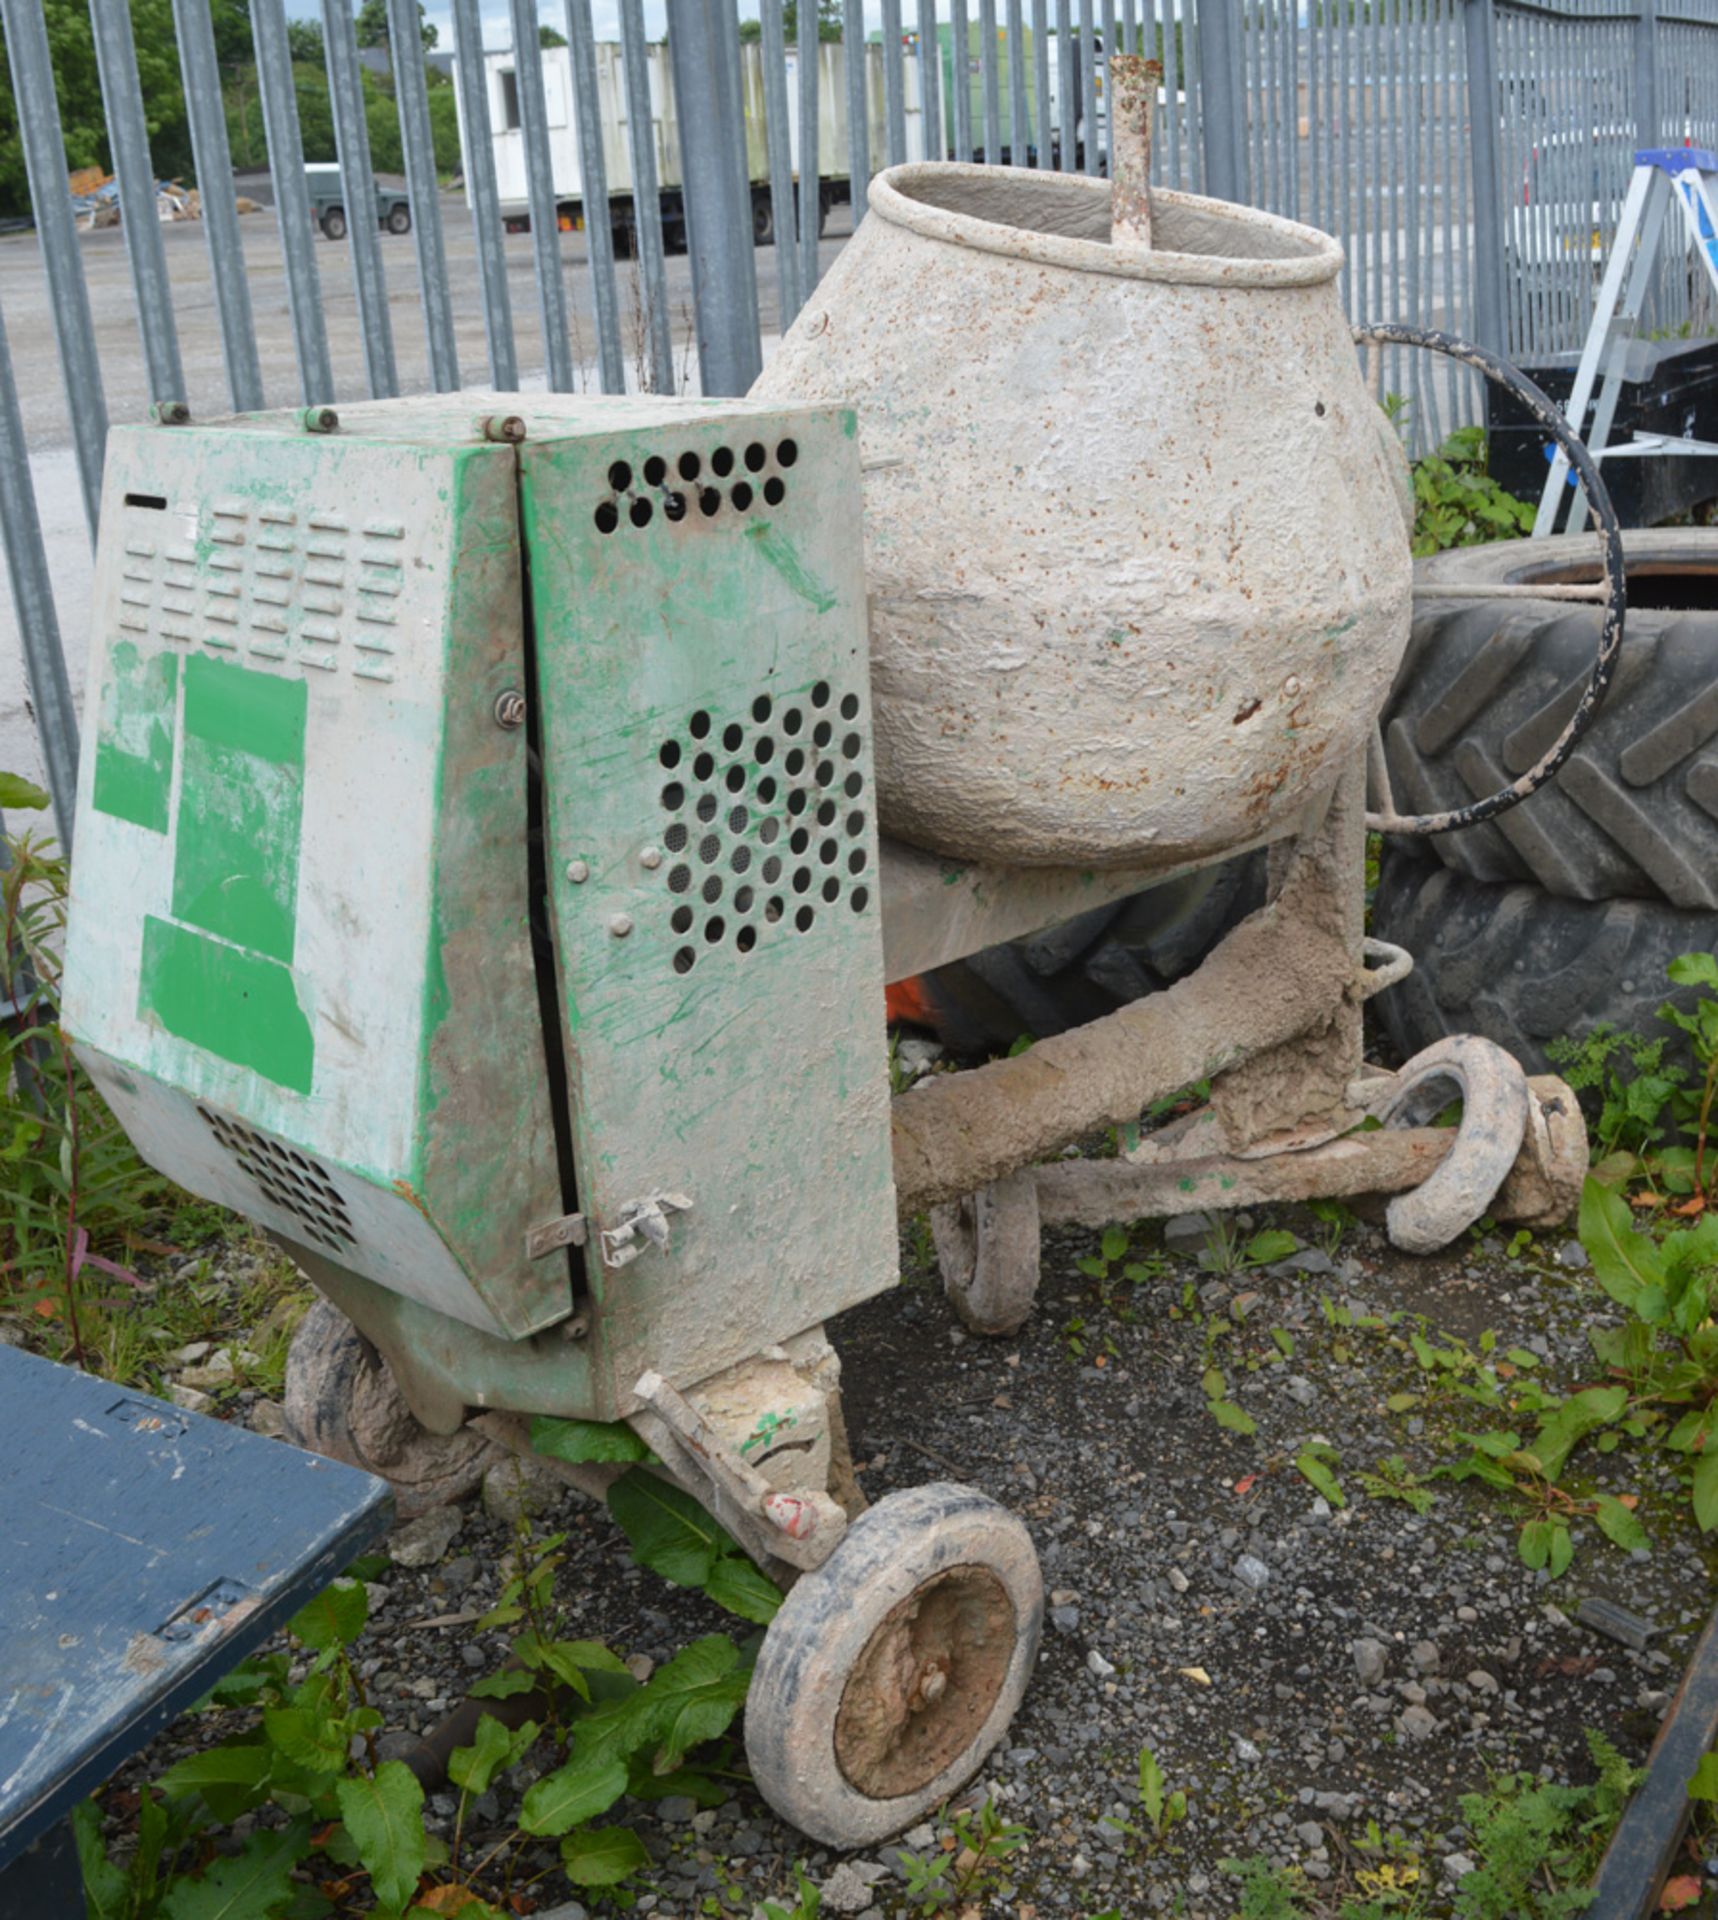 Belle electric start diesel driven site mixer A452373 - Image 2 of 3